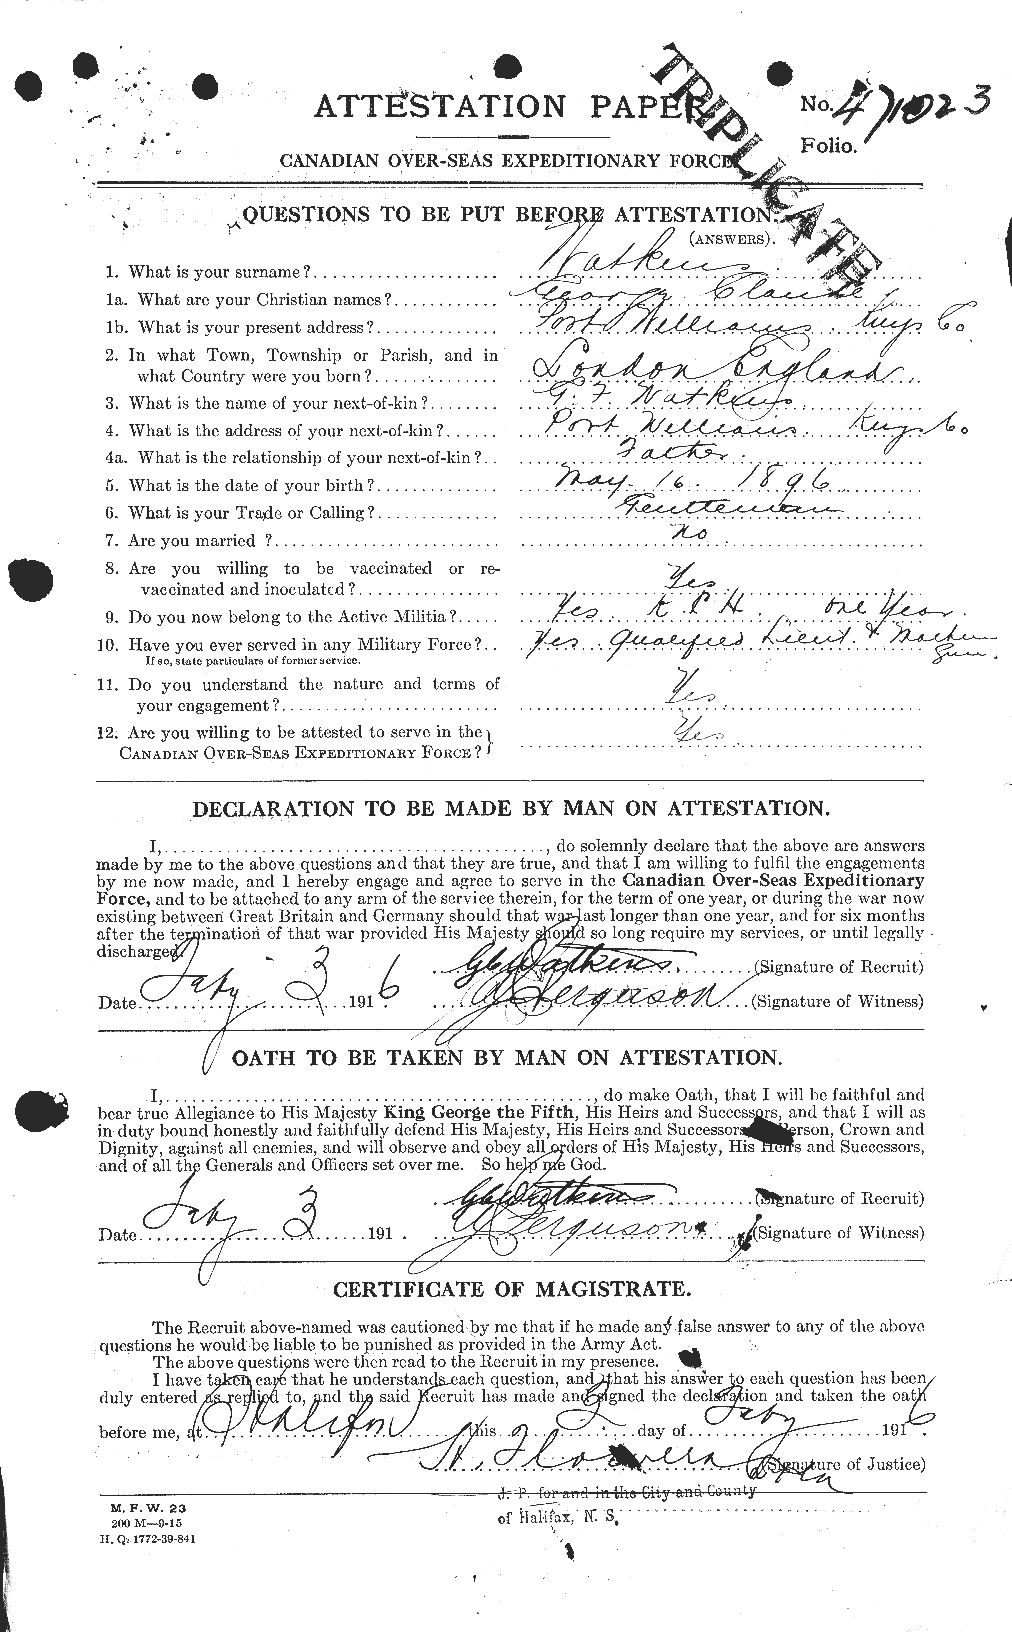 Personnel Records of the First World War - CEF 659214a